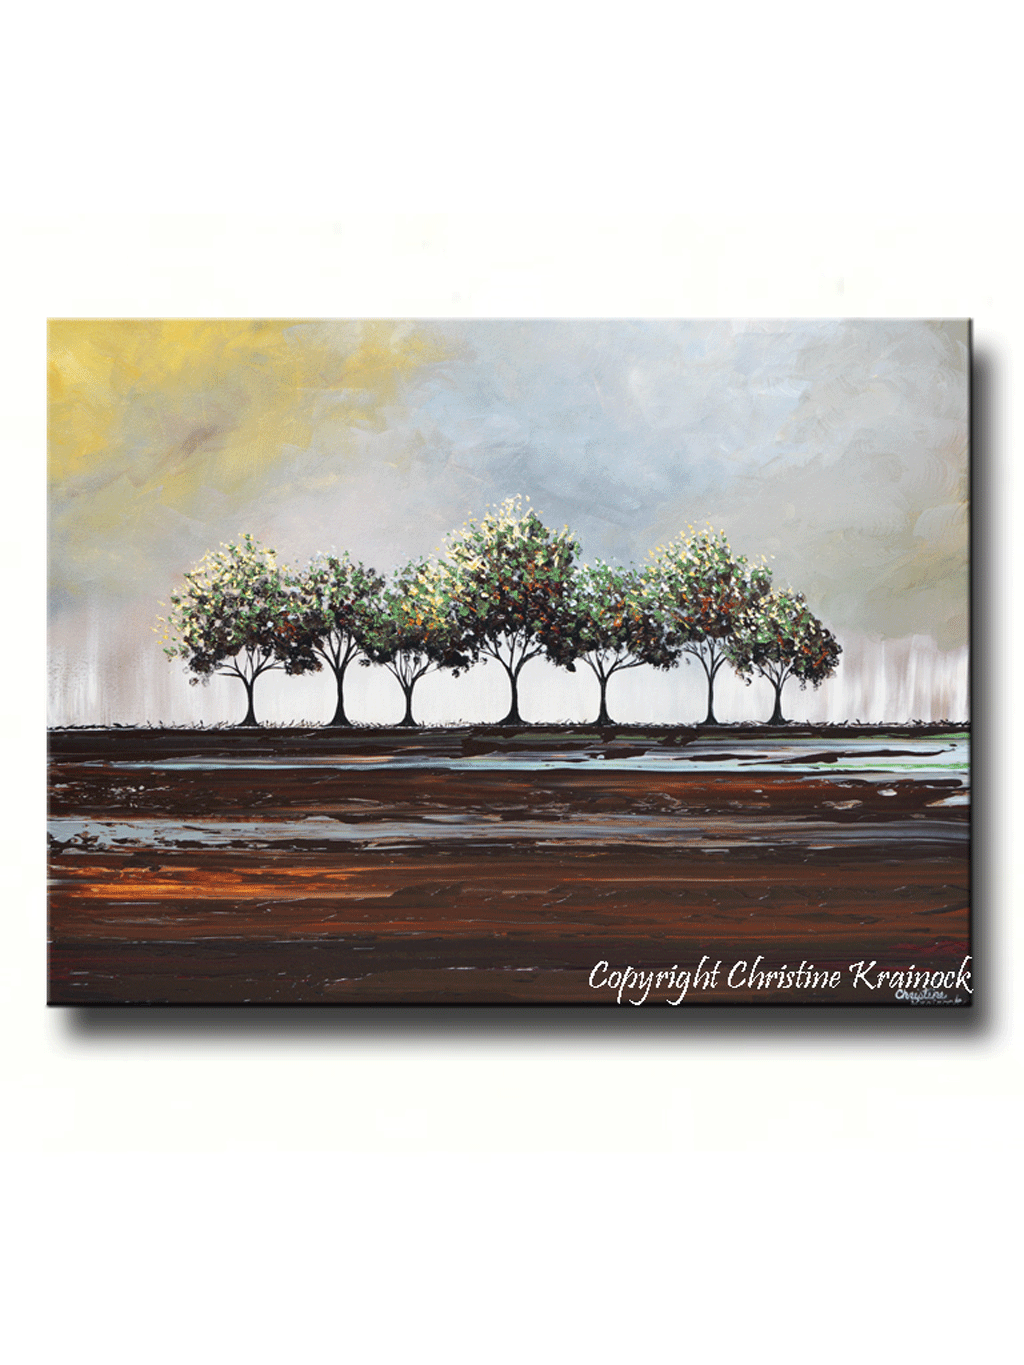 CUSTOM Art Abstract Painting Trees Green Textured Modern Palette Knife Tree Landscape Wall Decor Brown Grey MADE to ORDER -Christine - Christine Krainock Art - Contemporary Art by Christine - 1